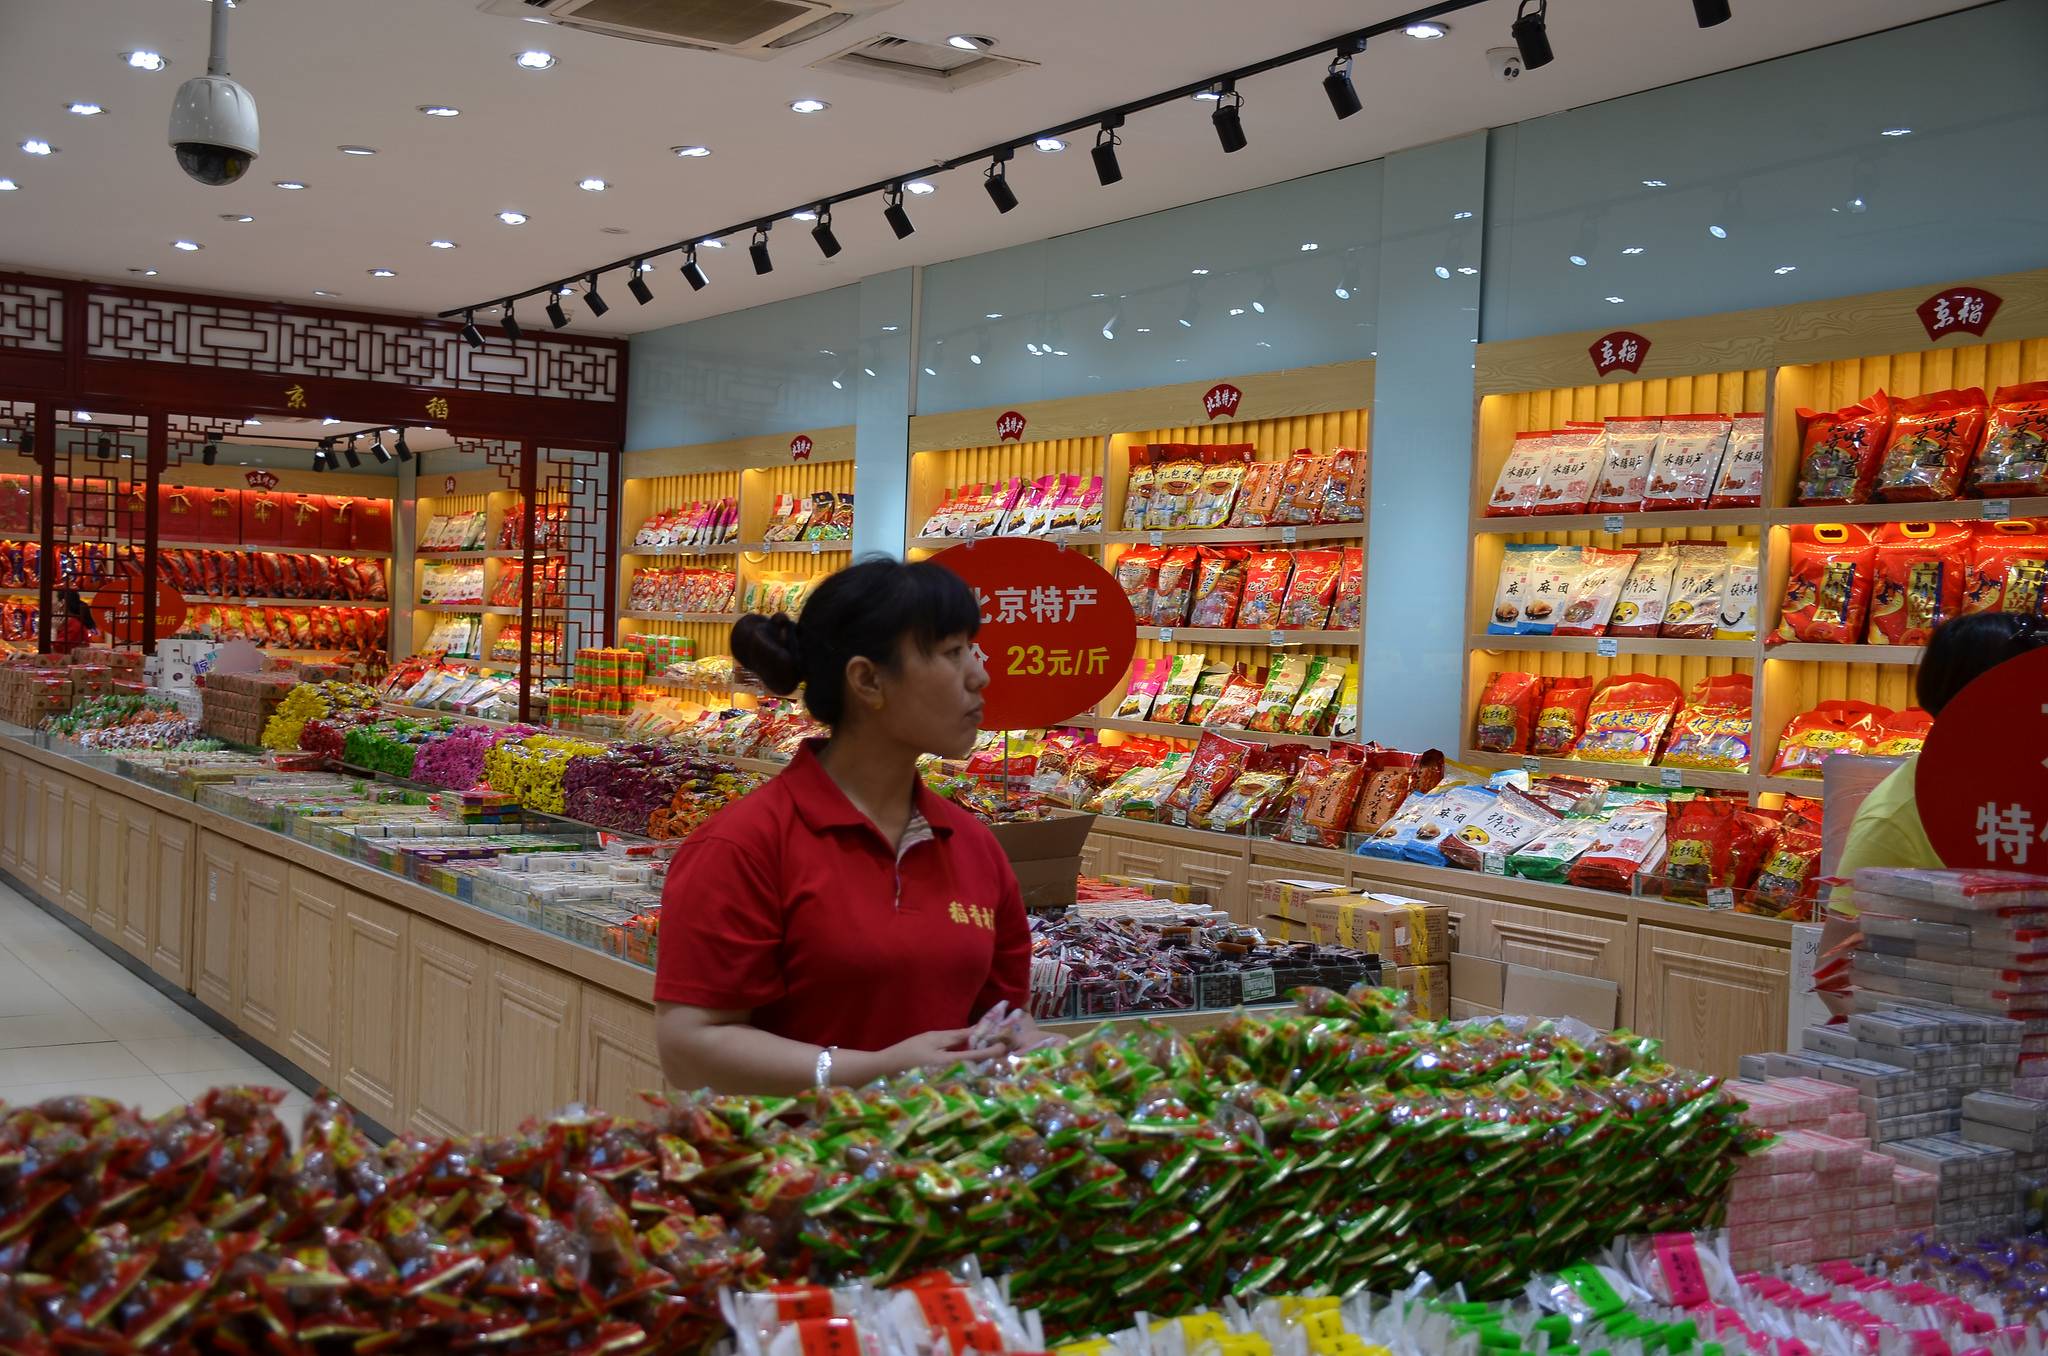 Alibaba's stores use big data to make shopping personal